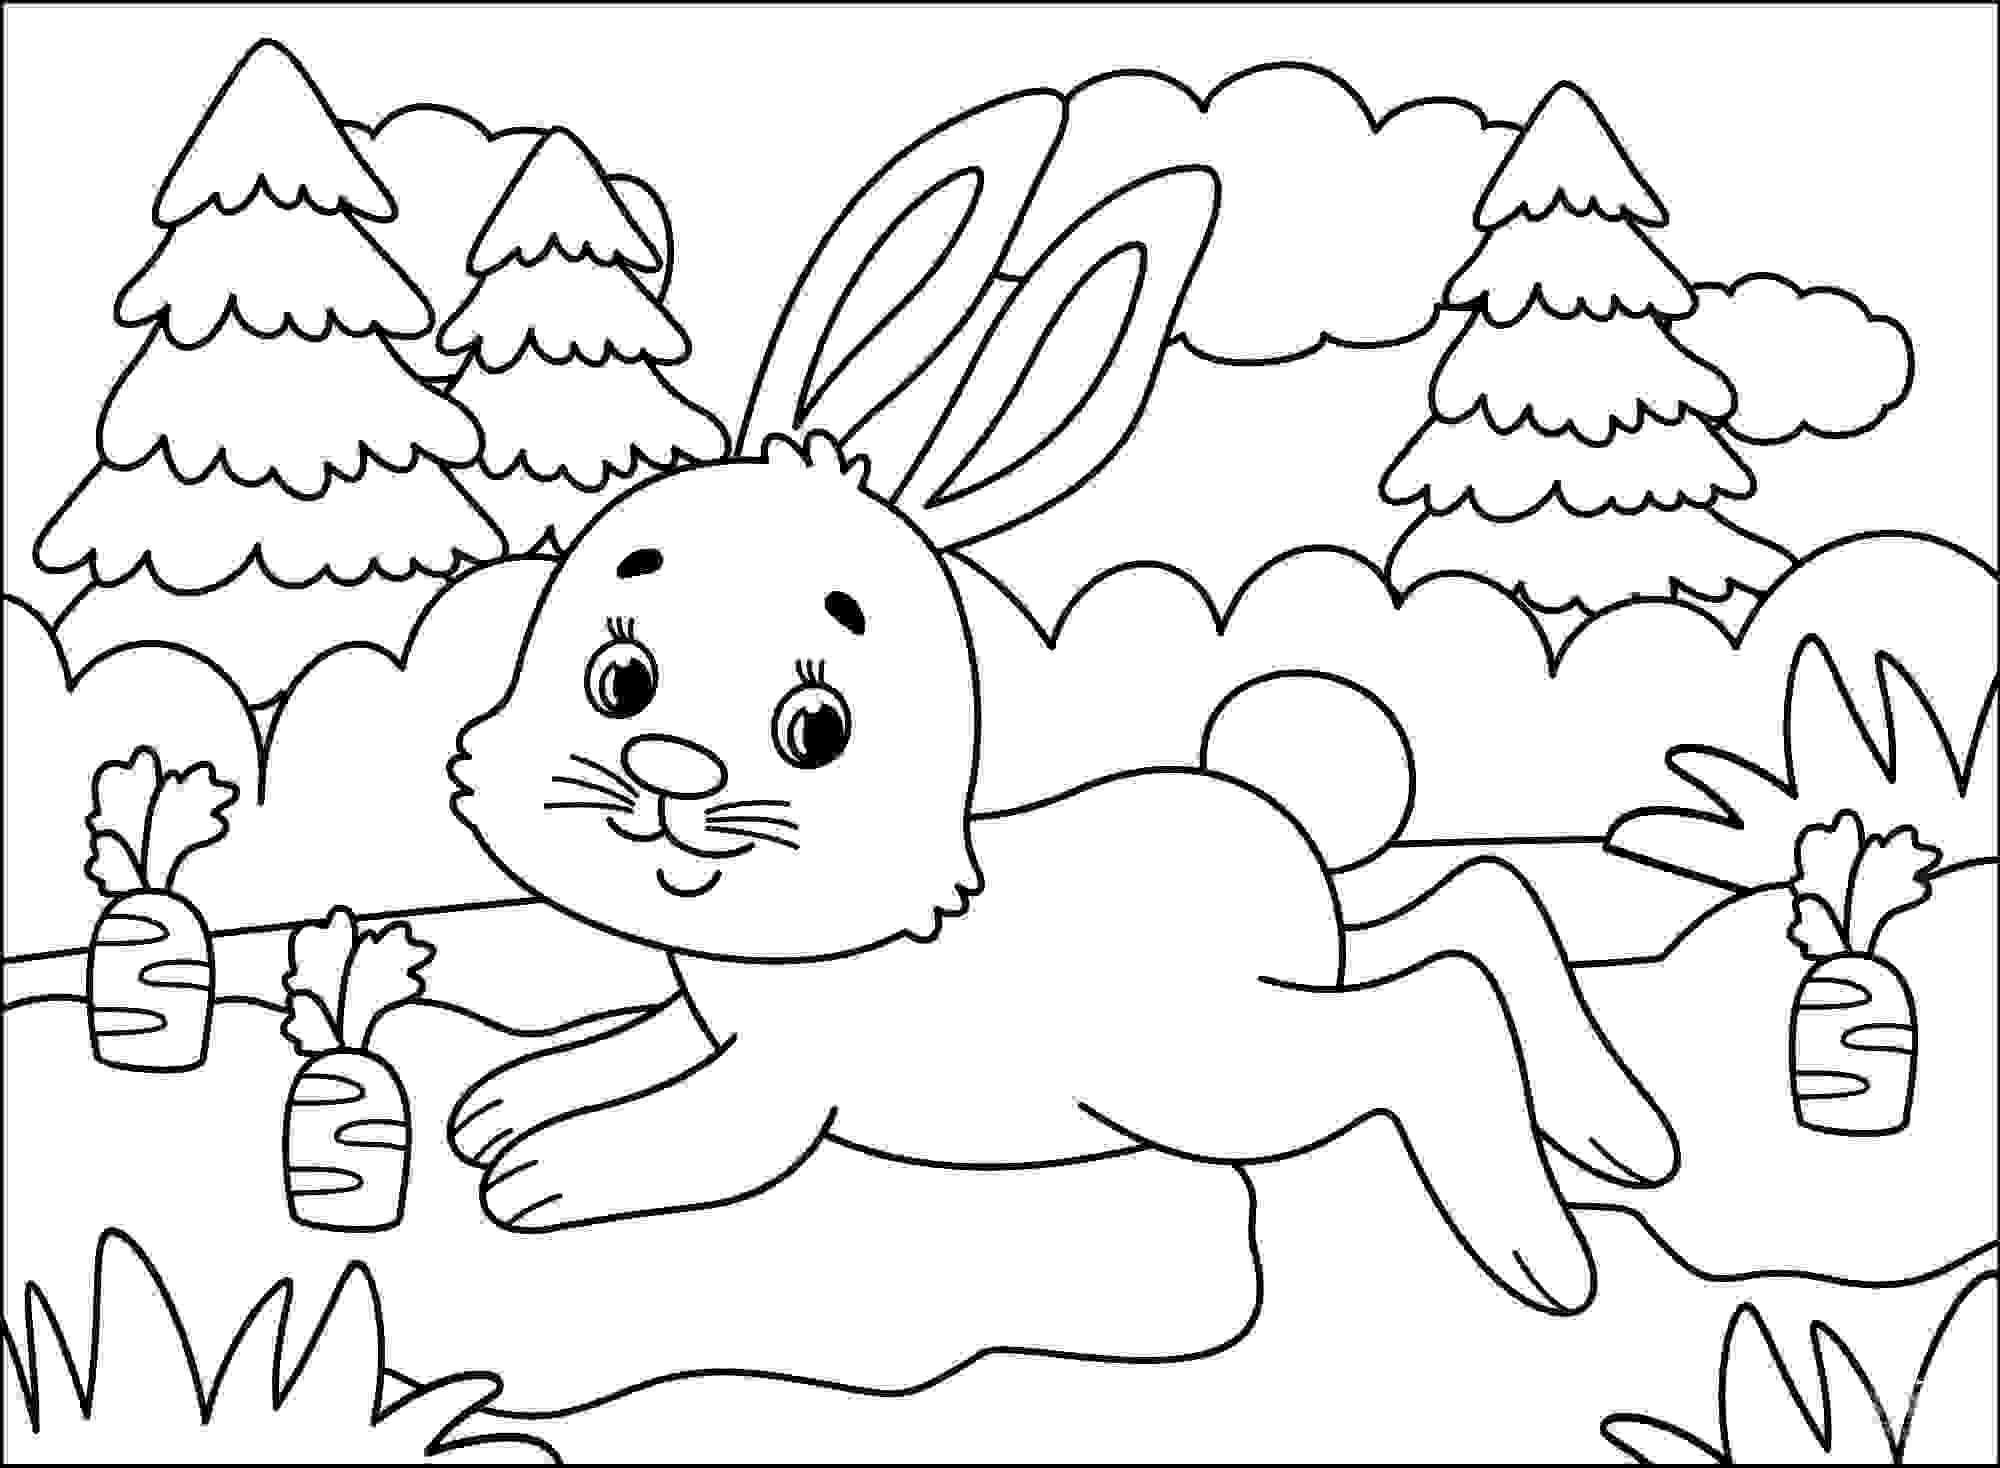 Bunny with a lot of carrots in the forest from Bunny